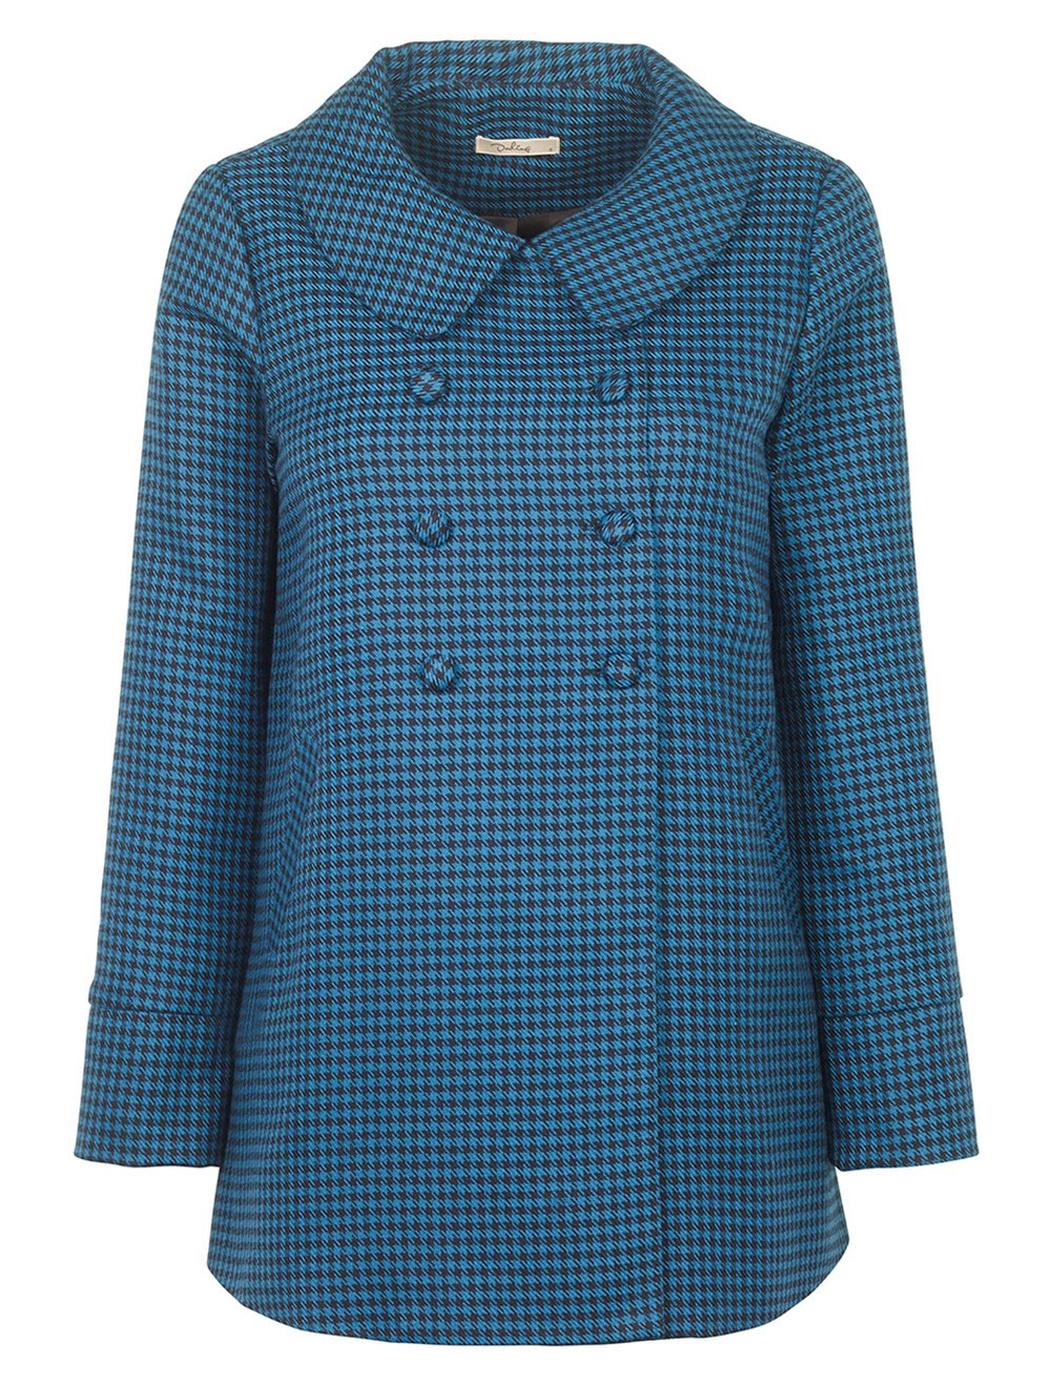 Enid DARLING Retro Mod Houndstooth Check Coat (T)